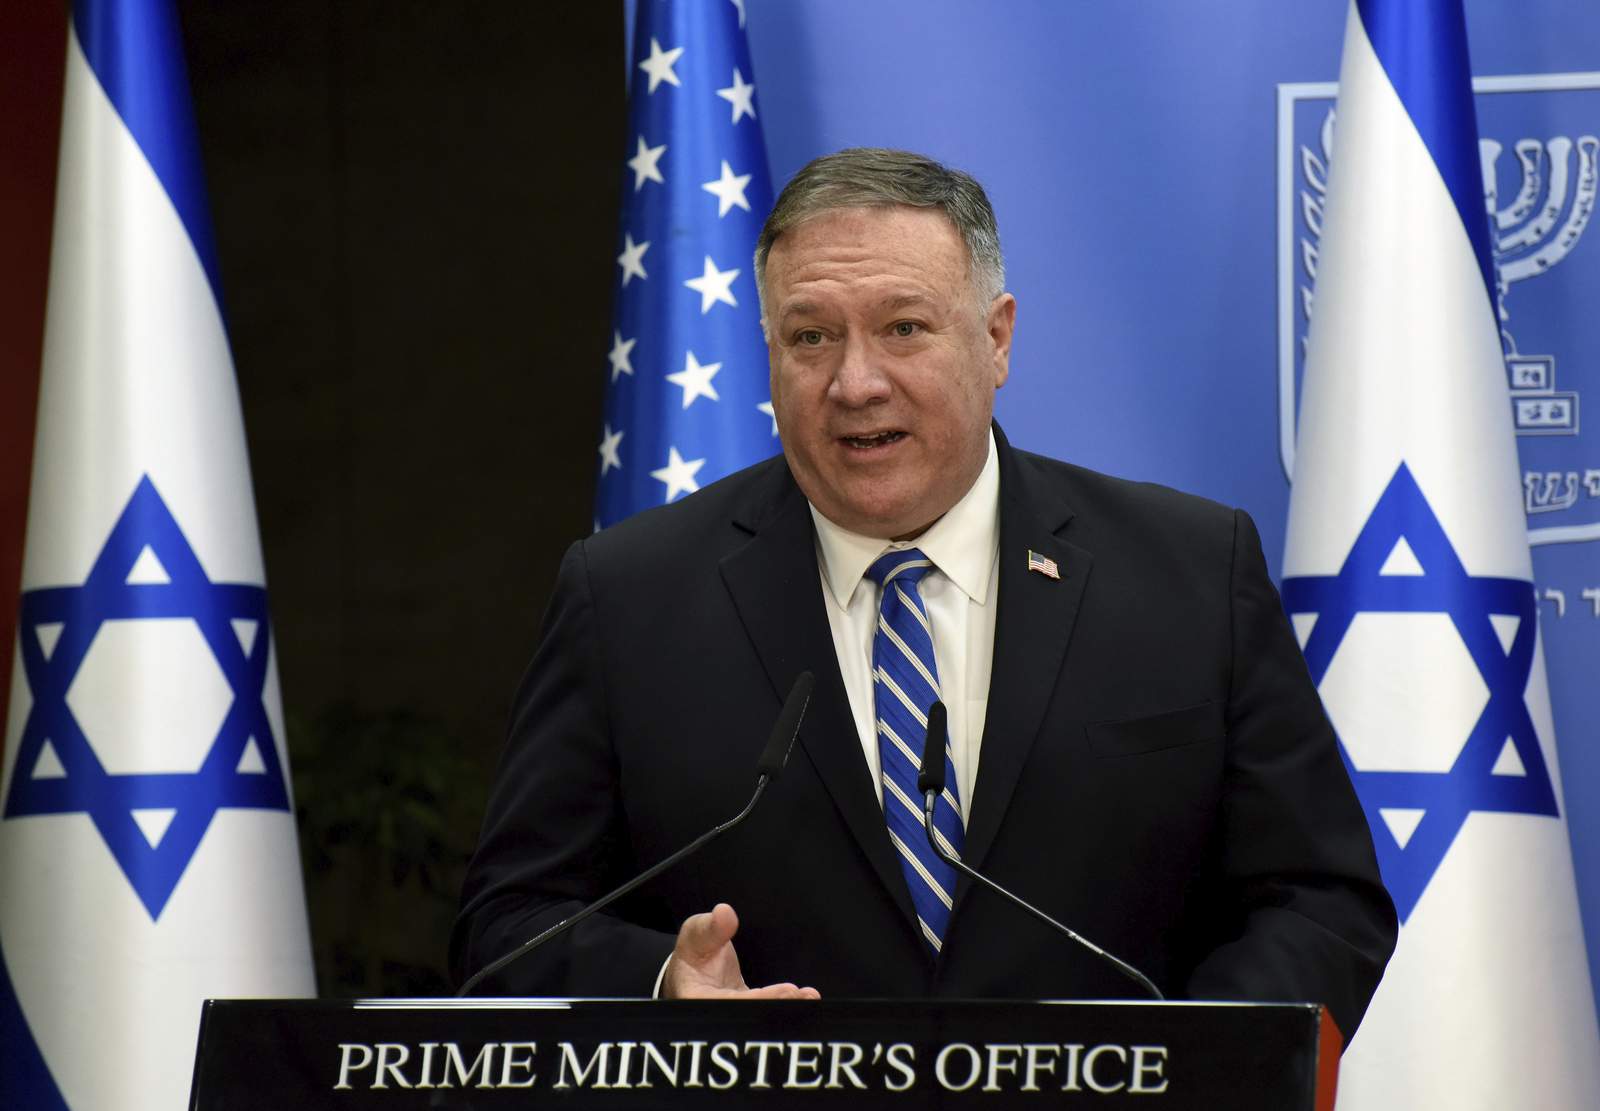 Defying precedent and possibly law, Pompeo dives into race